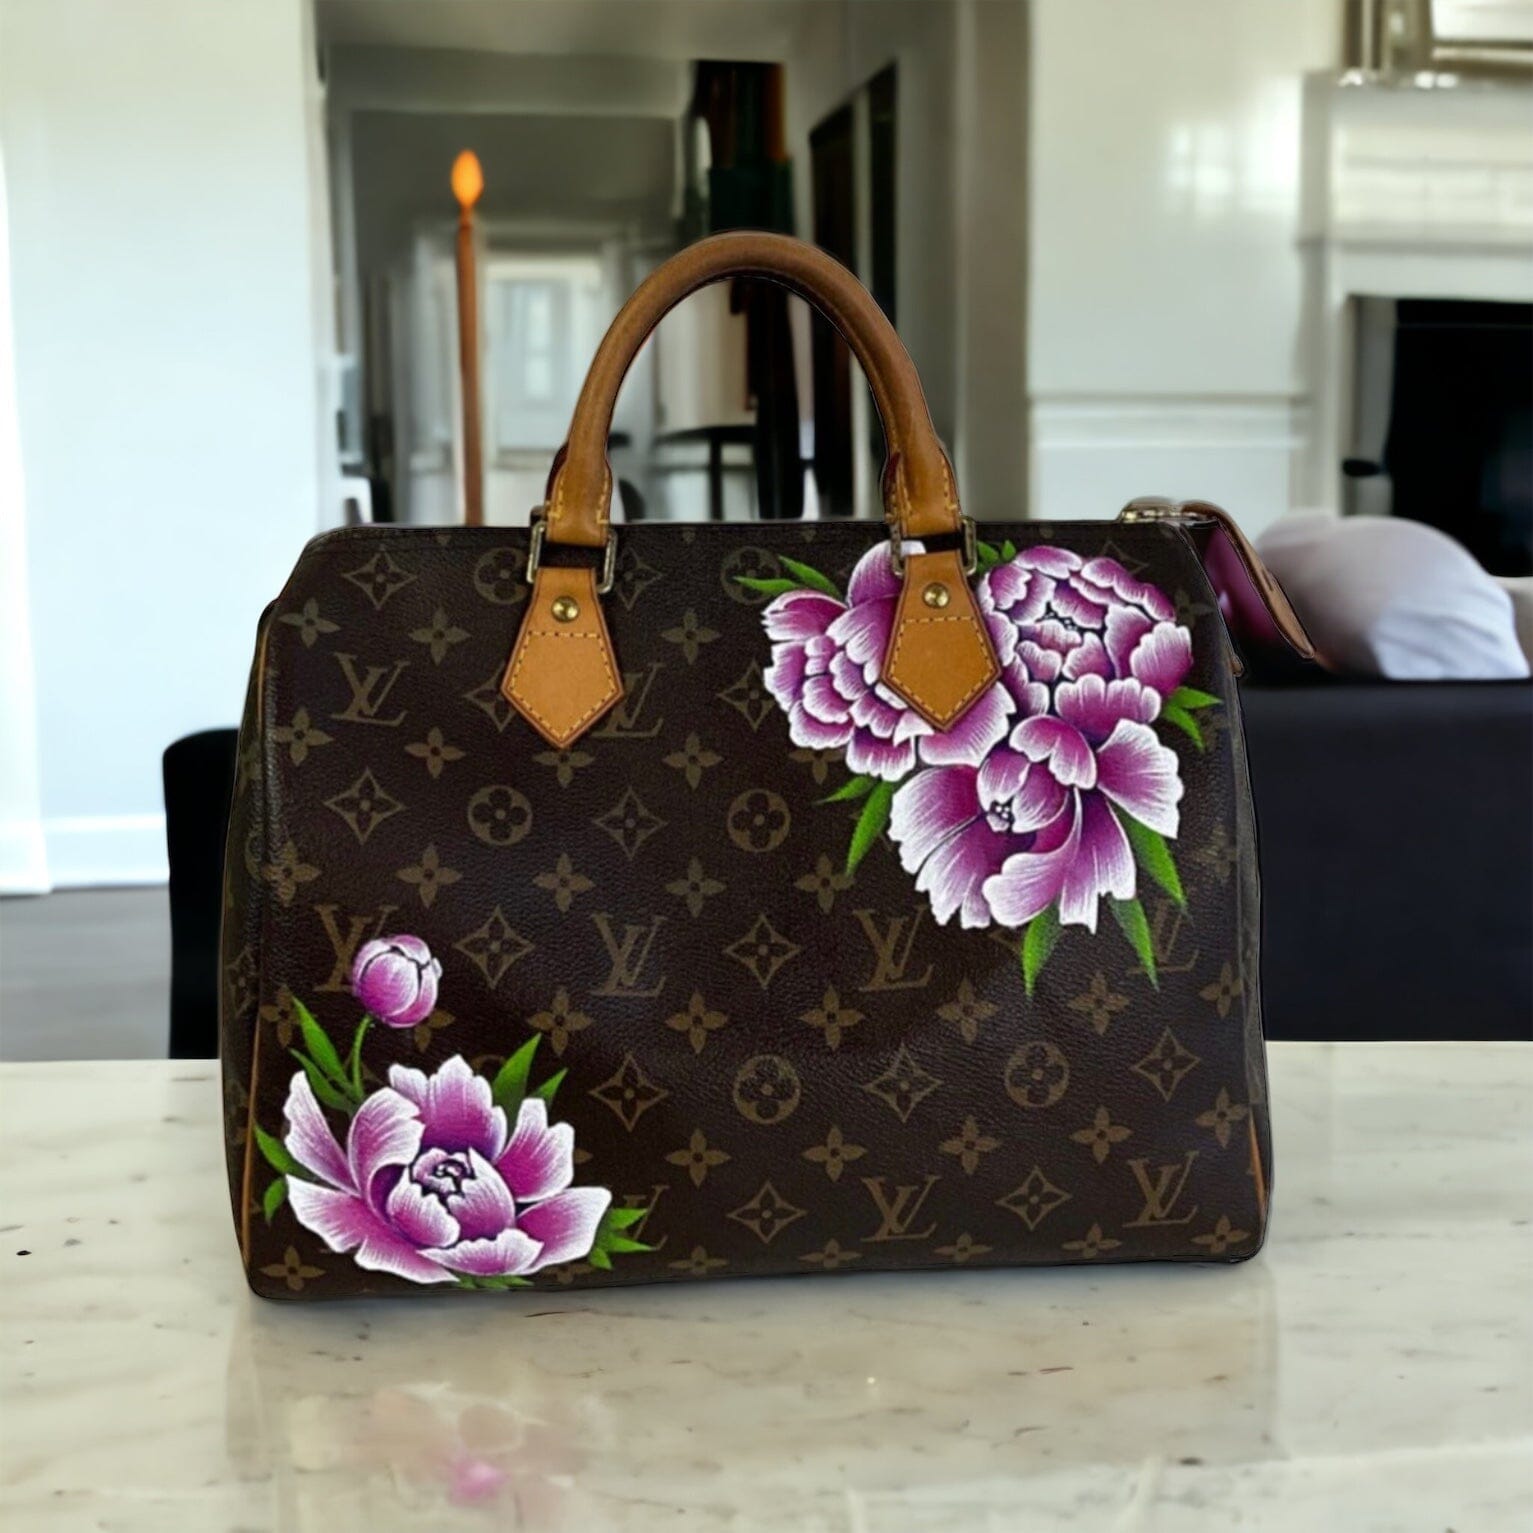 How to convert Vintage Louis Vuitton Speedy into a crossbody by